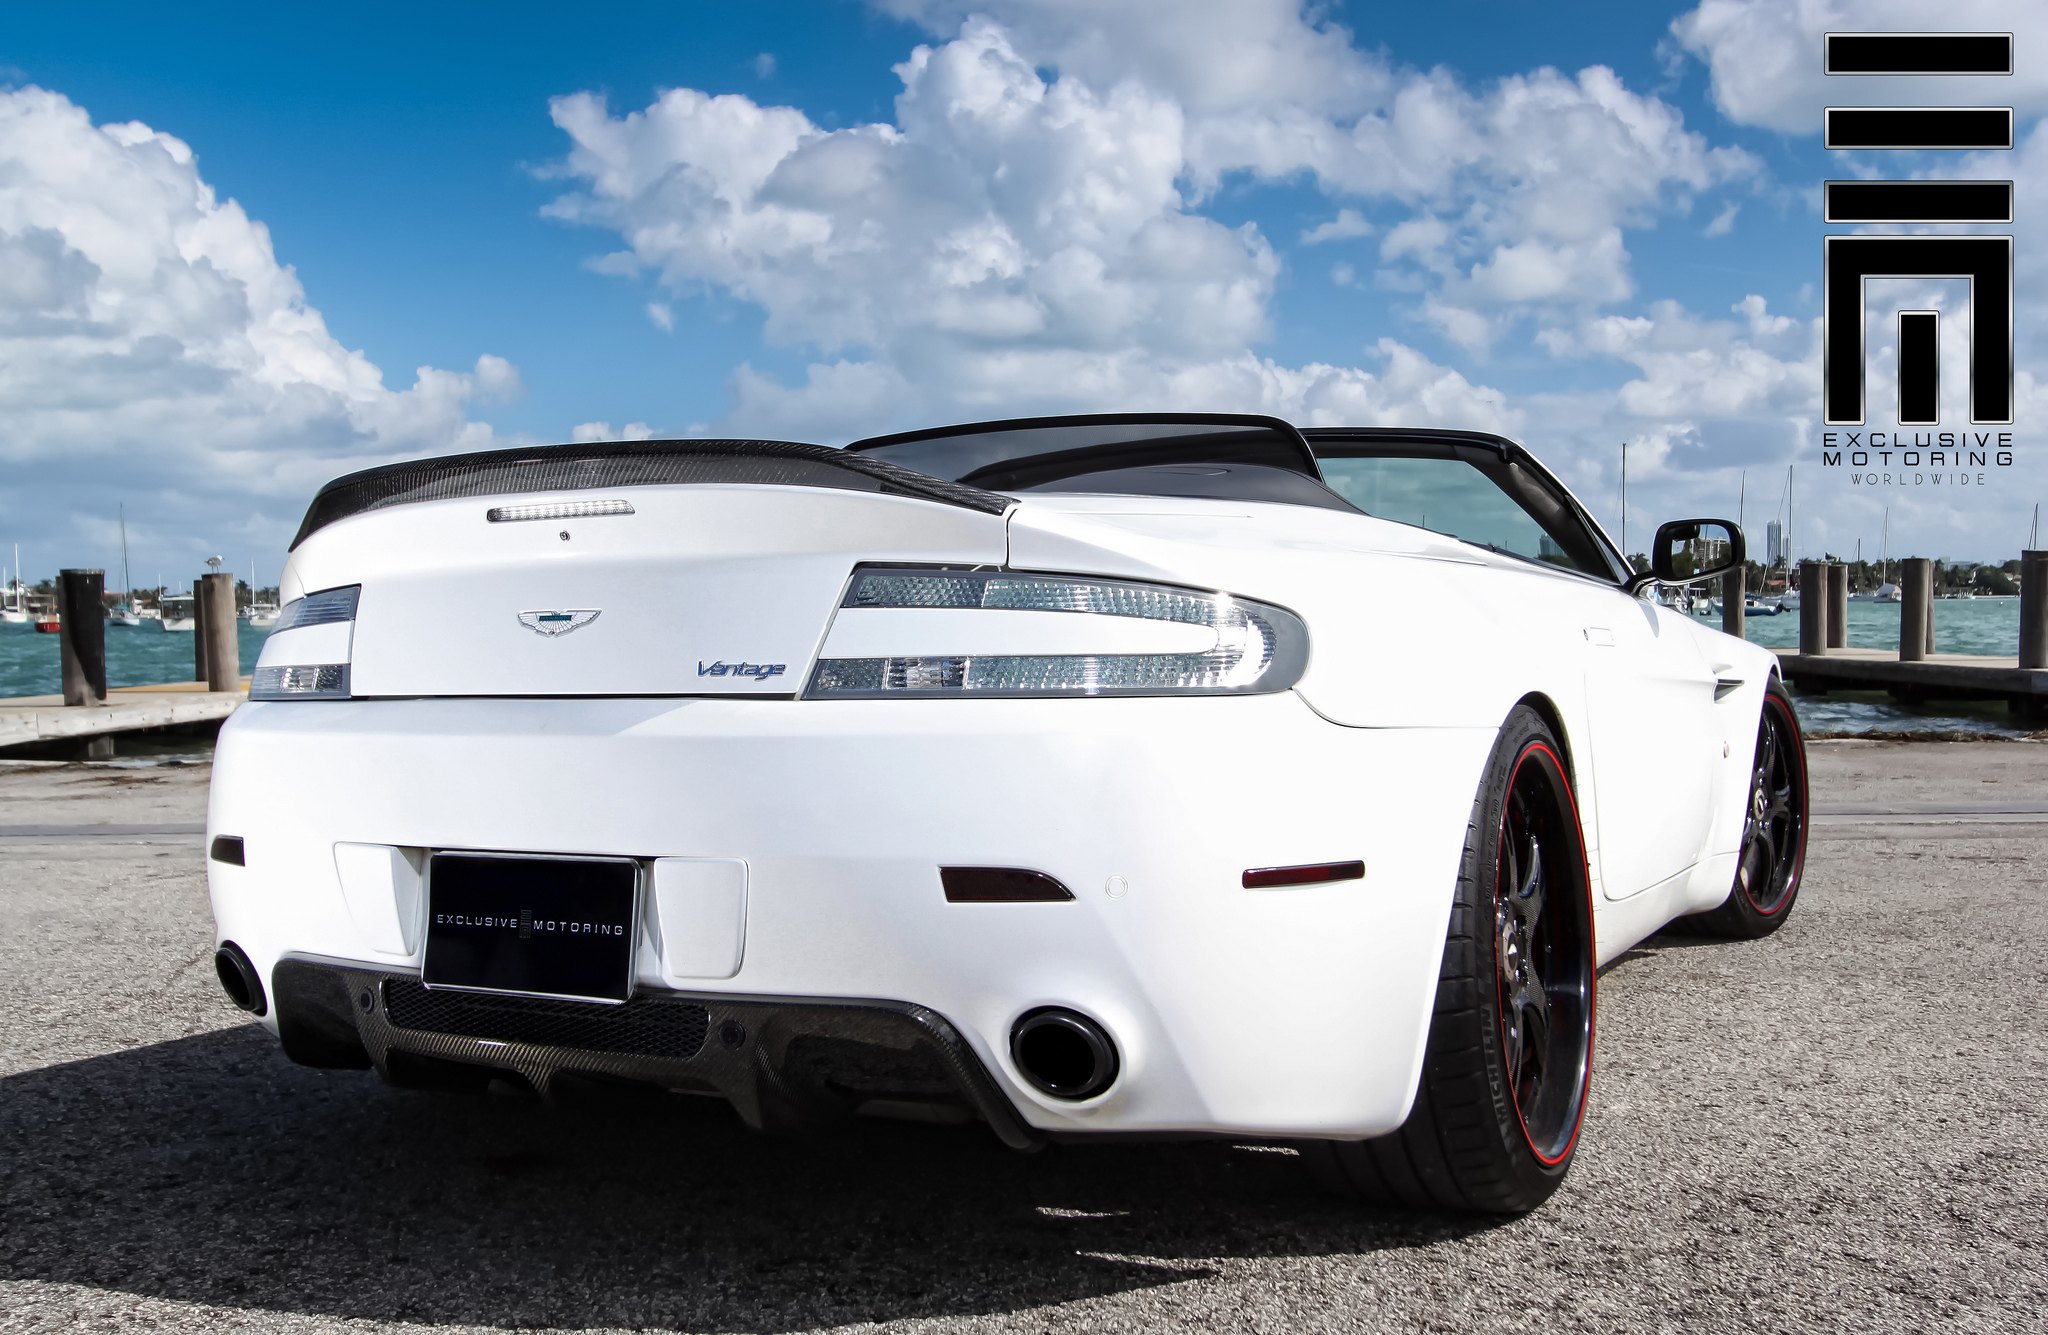 Aston Martin Vantage on custom wheels with red line - Photo by Exclusive Motoring